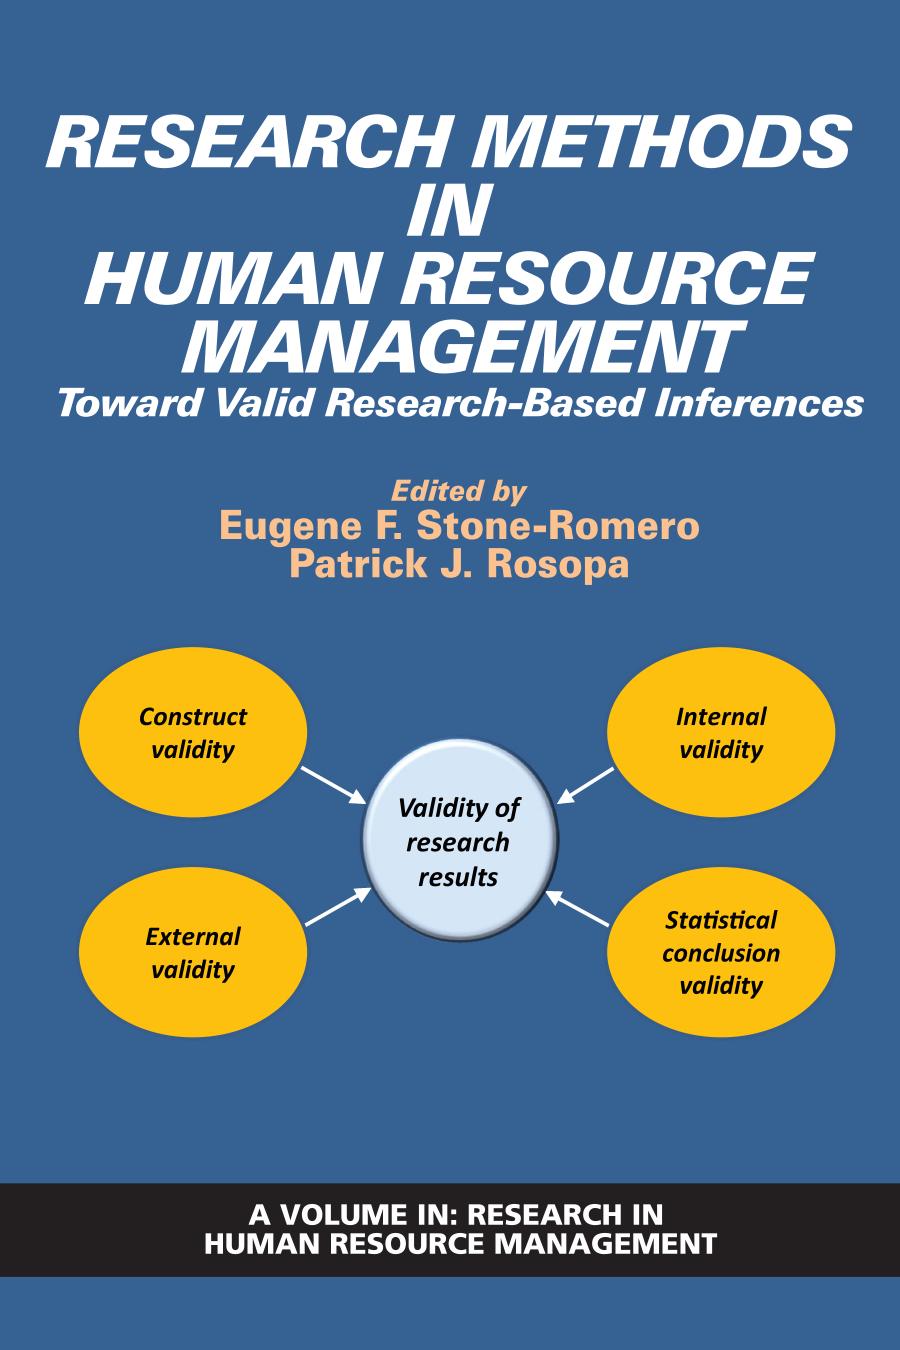 Research methods in human research management : toward valid research-based inferences